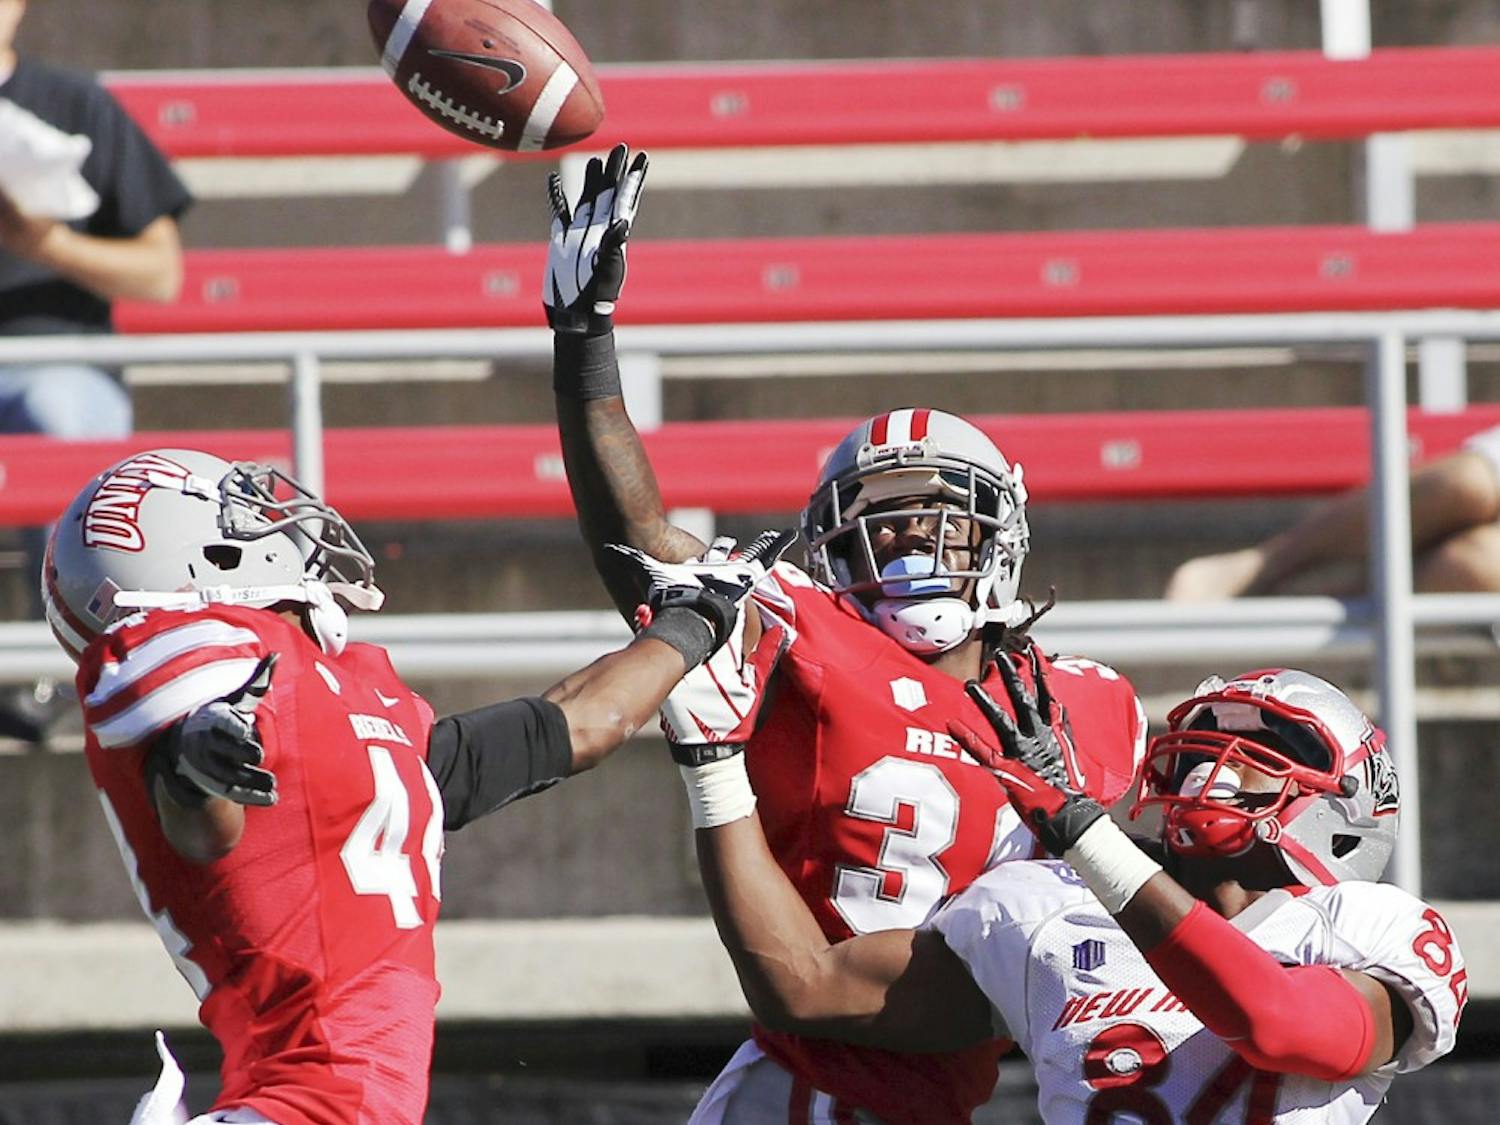 	UNLV defensive backs Sidney Hodge, center, and Kenny Keys defend a pass intended for UNM wide receiver Ty Kirk during the game Saturday in Las Vegas, Nev. The Lobos went on to lose 35-7, their third consecutive loss. 